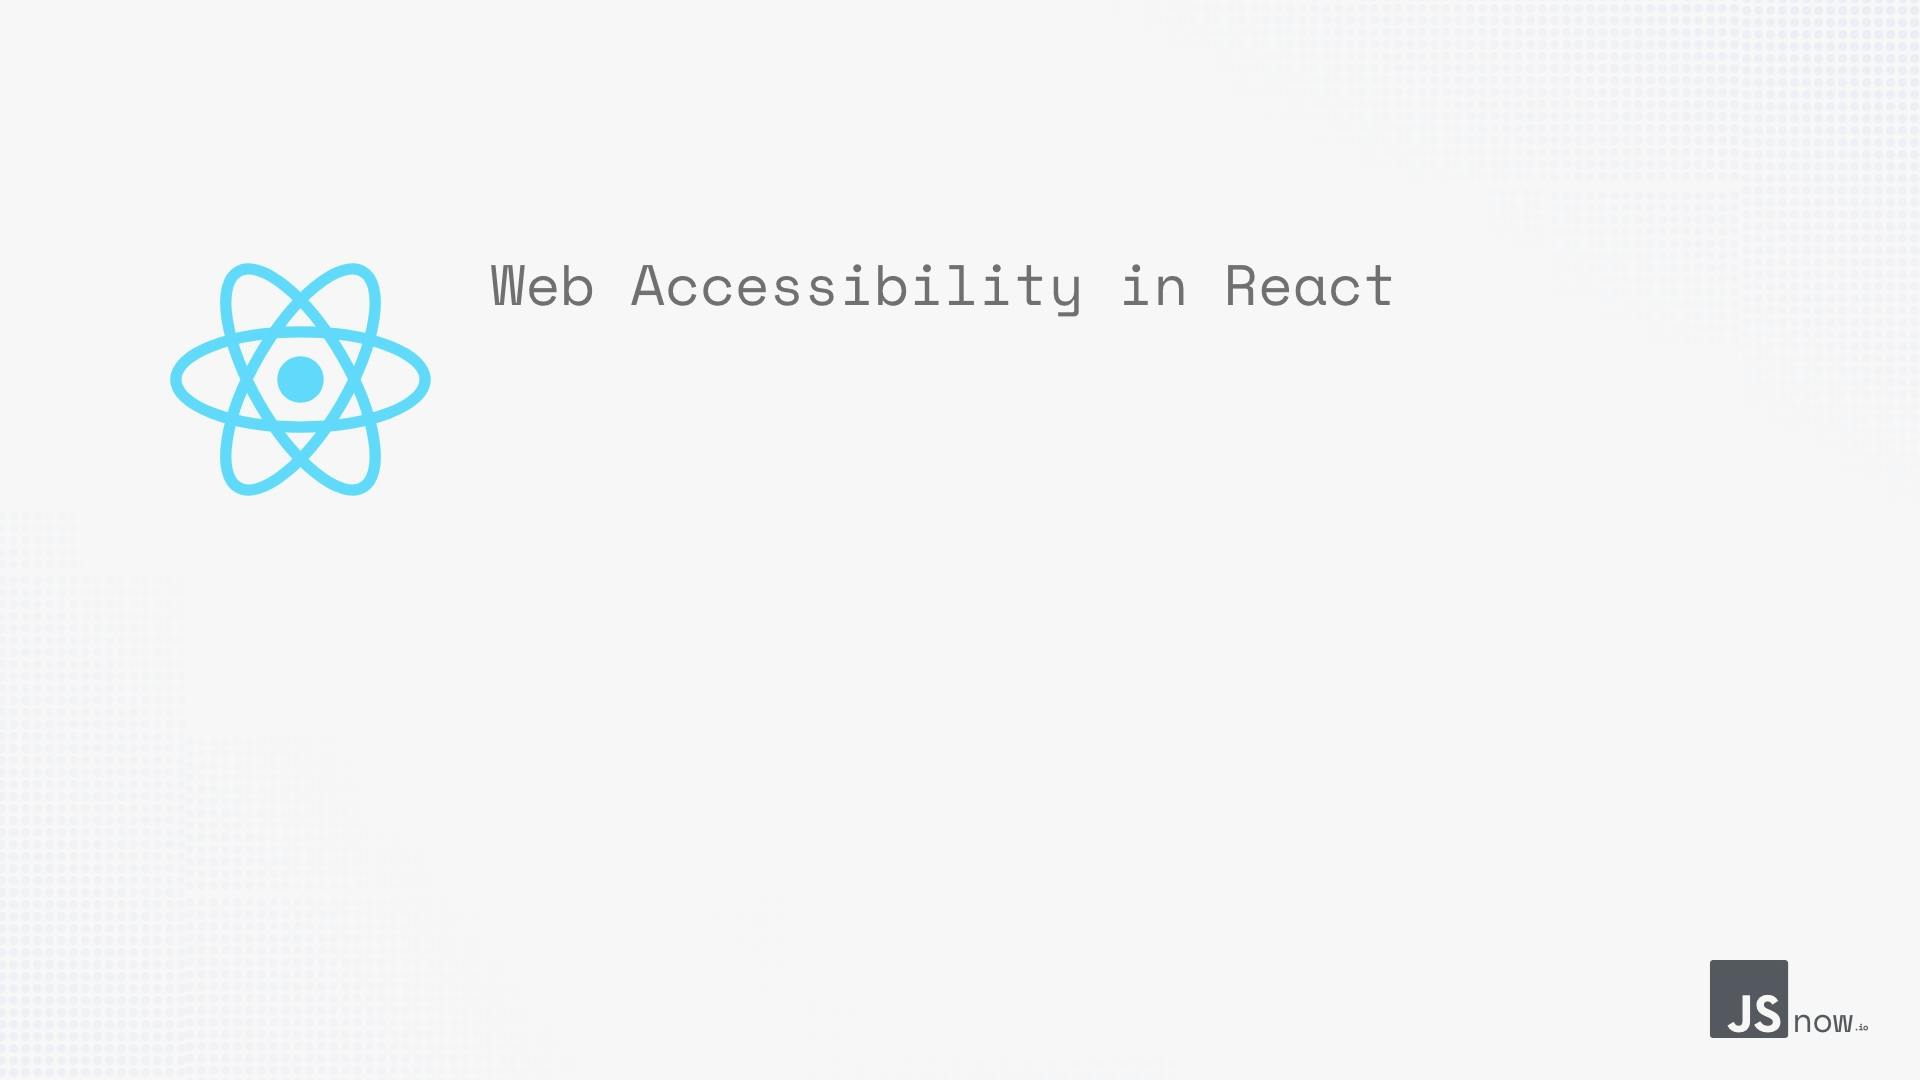 Web Accessibility in React main image